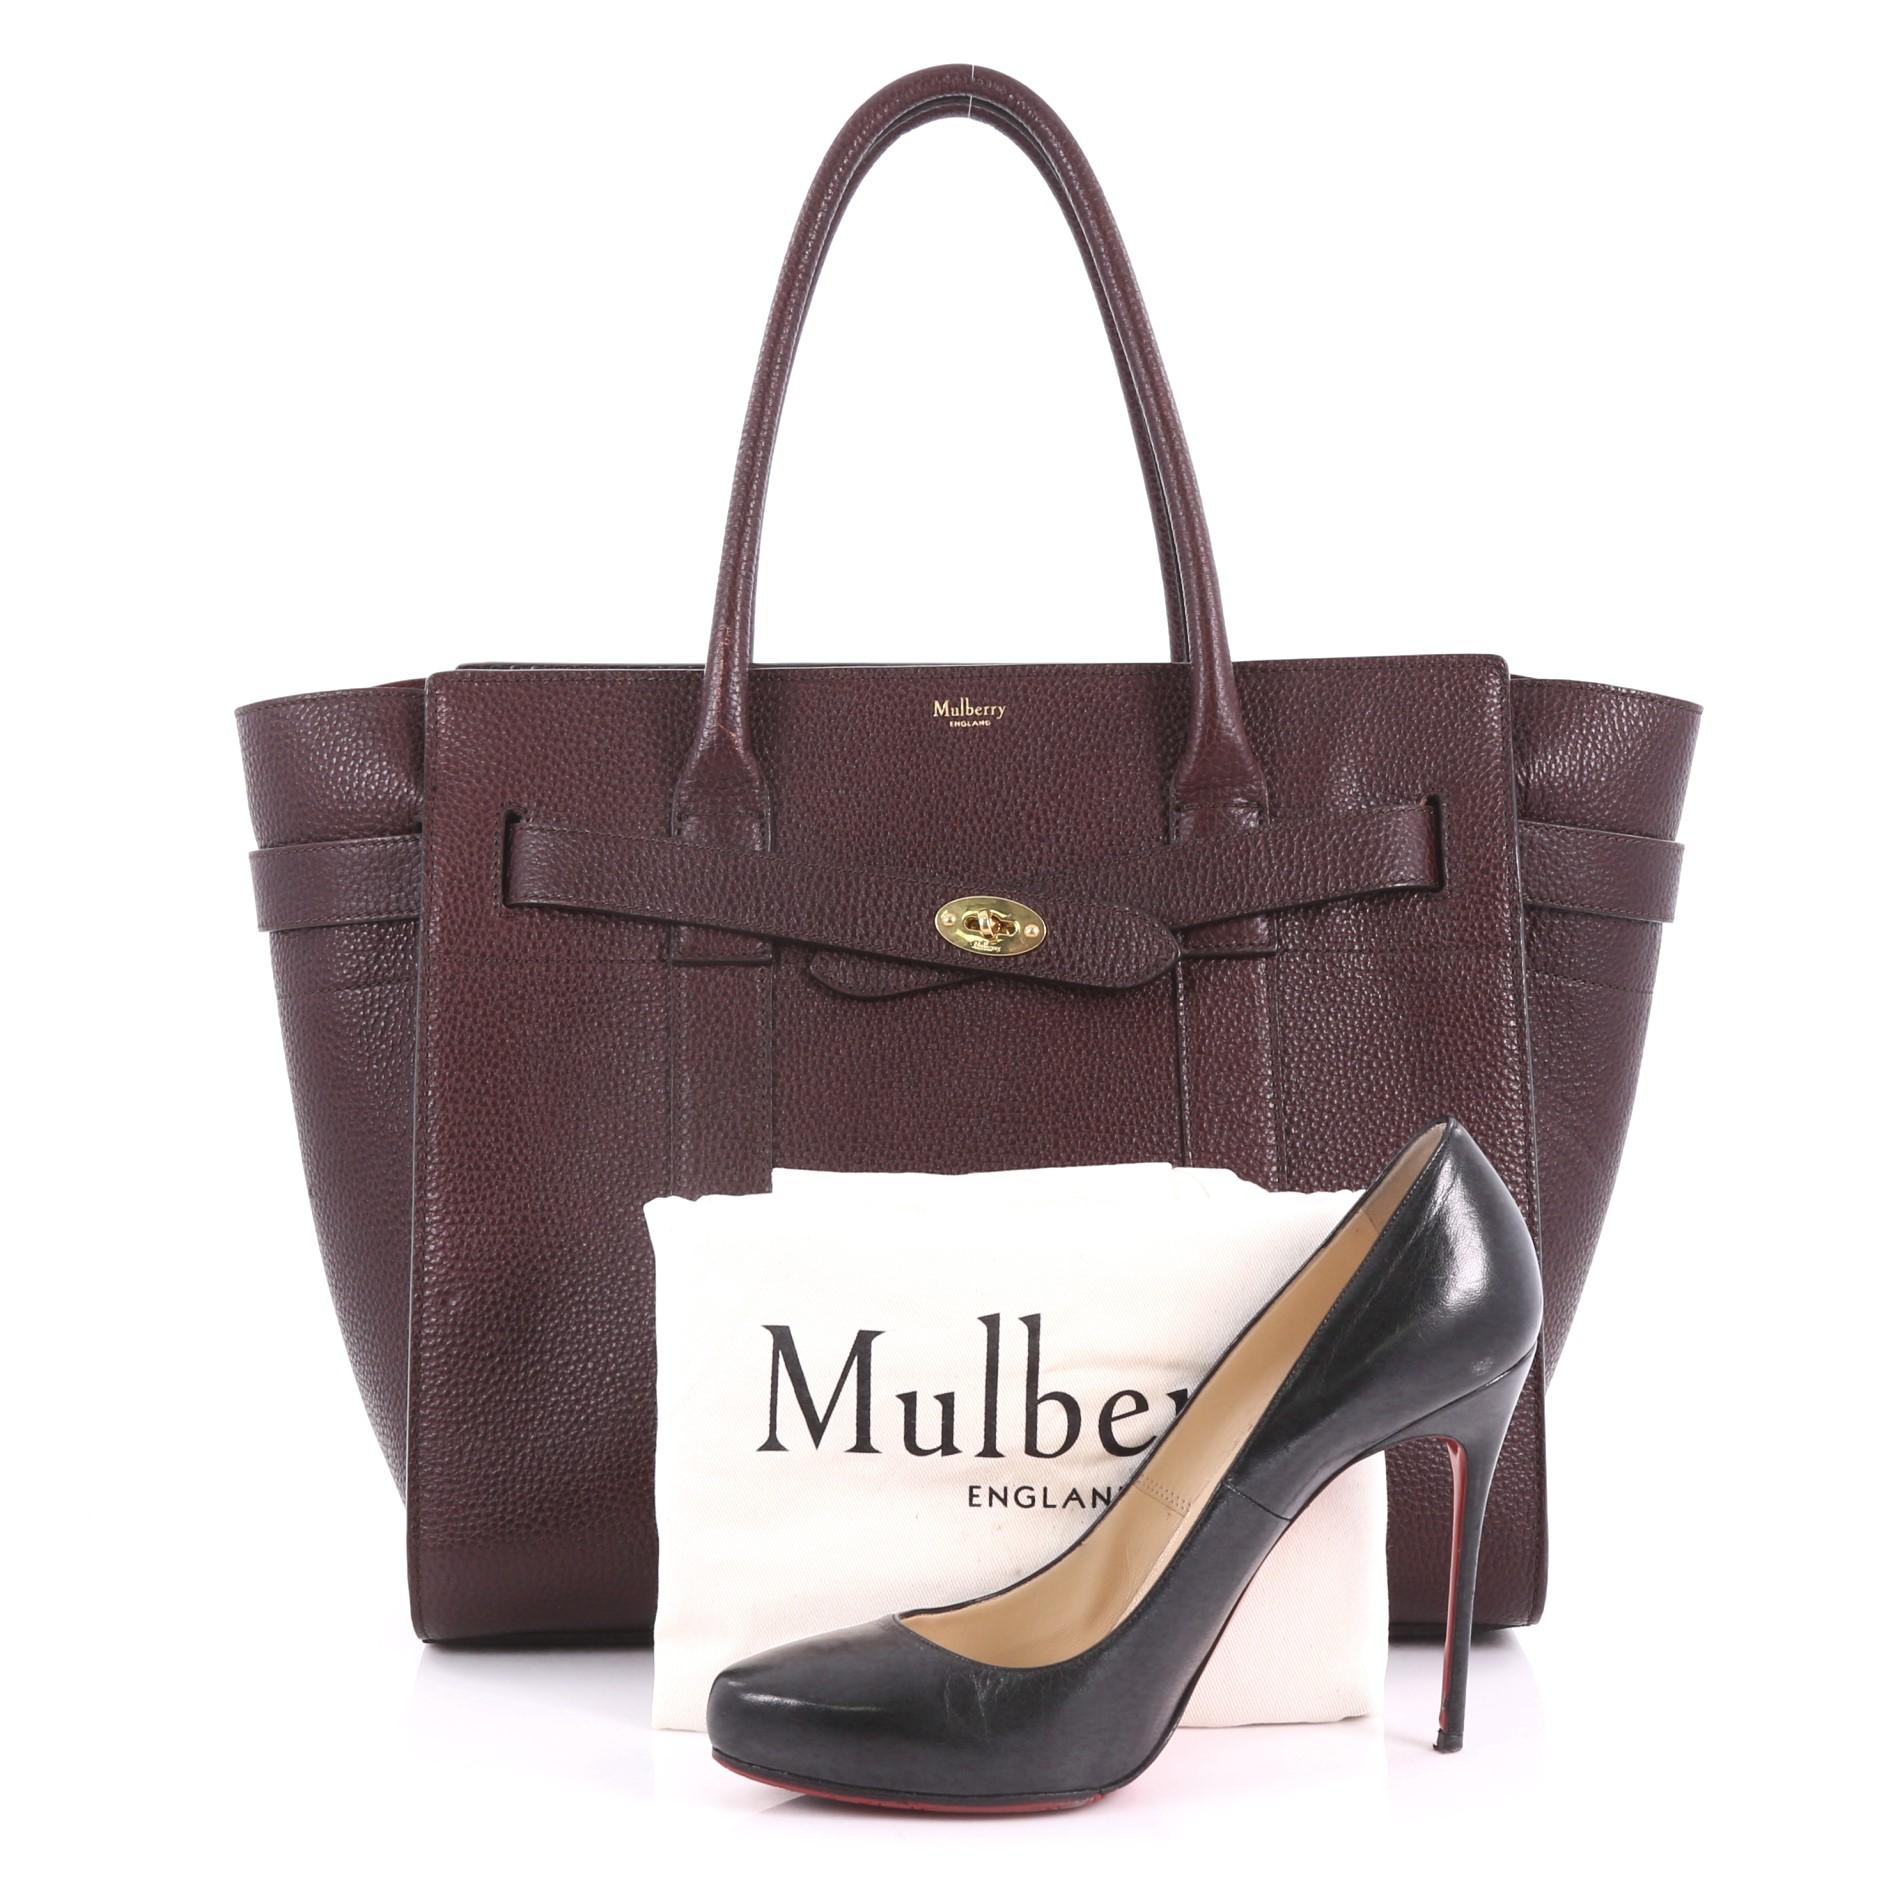 This Mulberry Bayswater Zipped Tote Leather Medium, crafted in maroon leather, features dual-rolled leather handles, belted leather straps with miniature Postman’s lock and gold-tone hardware. Its zip closure opens to a maroon-suede-lined interior